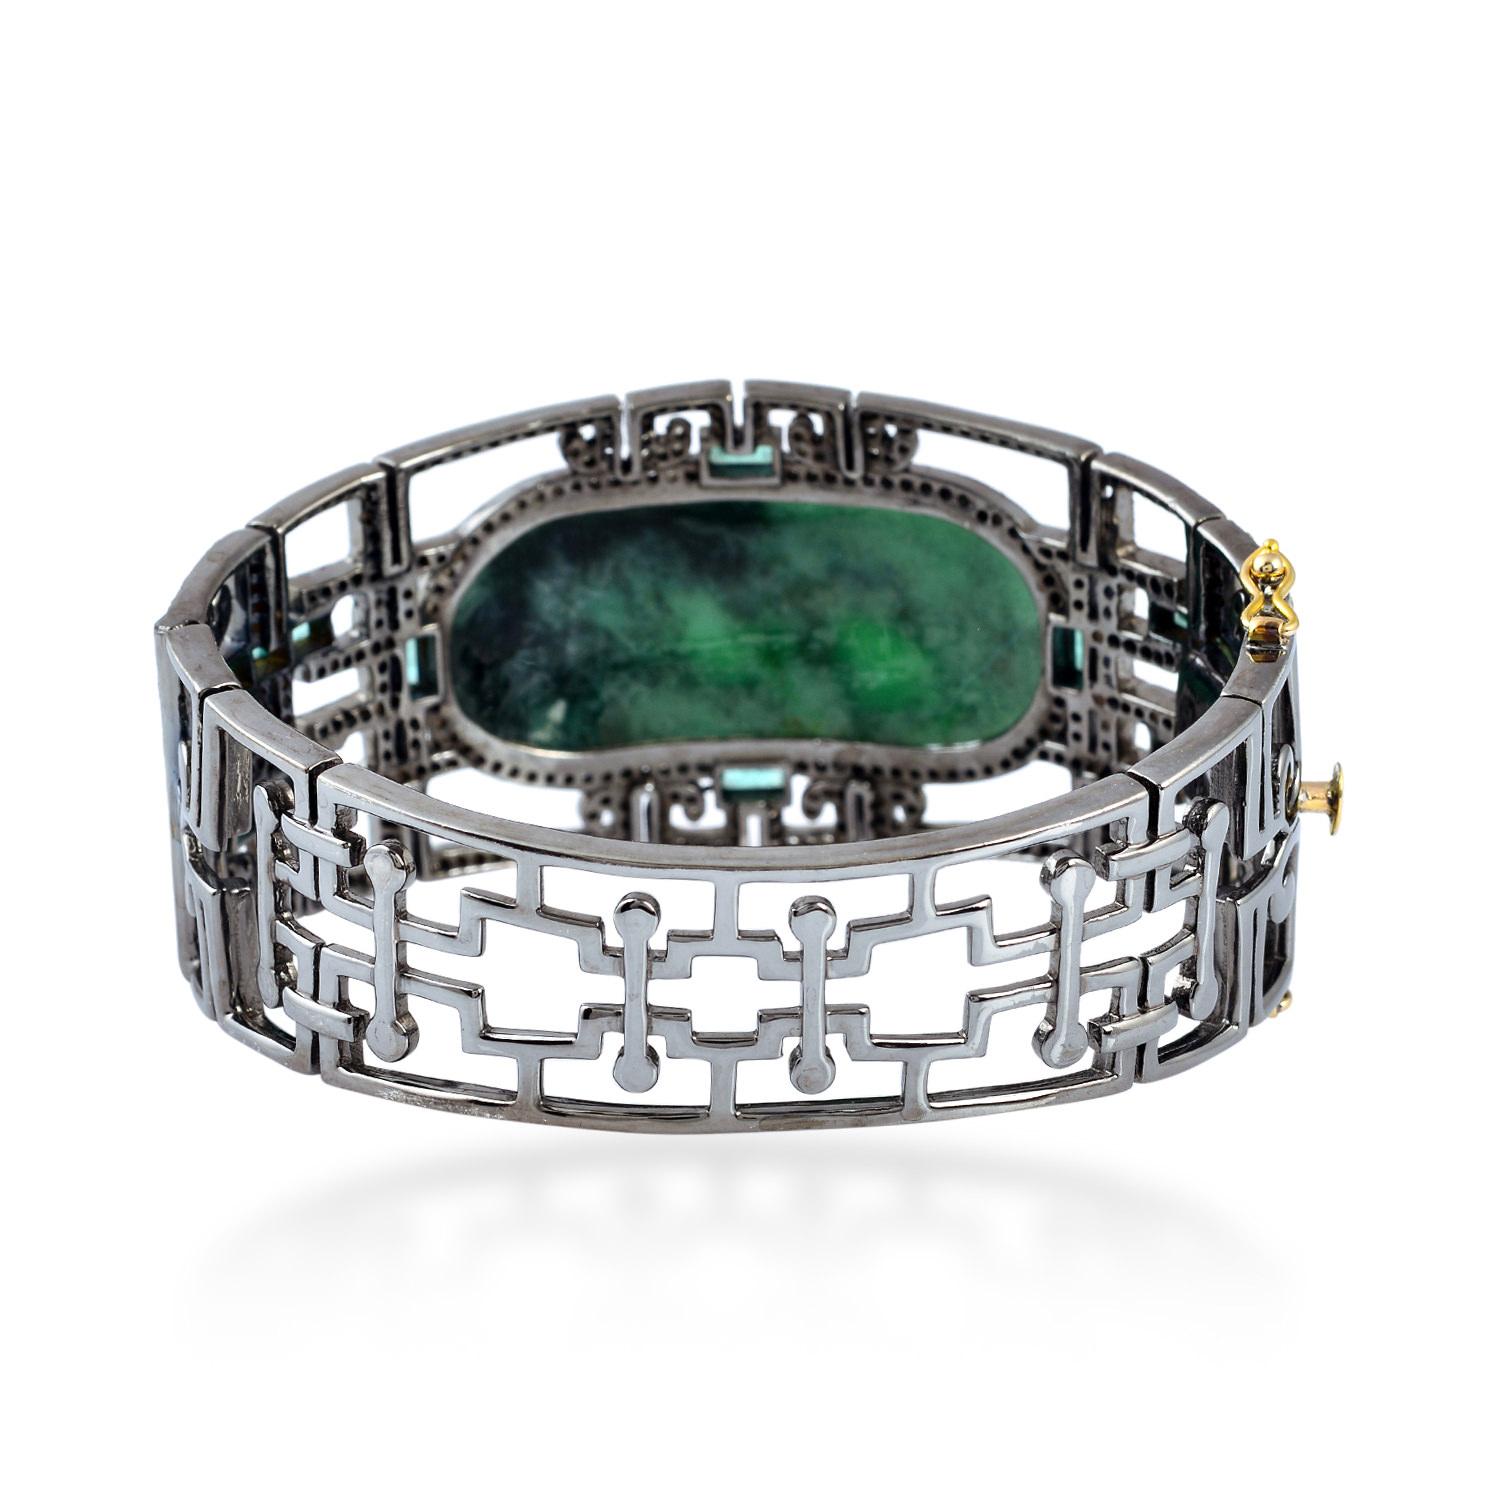 Oval oriental designer bangle with hand craved jade in center with round diamonds and emerald baguettes around.

Closure: Tounge Clasp

18Kt: 2.9g
Diamond: 2.86Ct
Sl: 34.928g
EMERALD: 1.75Ct
JADE: 32.5Ct 